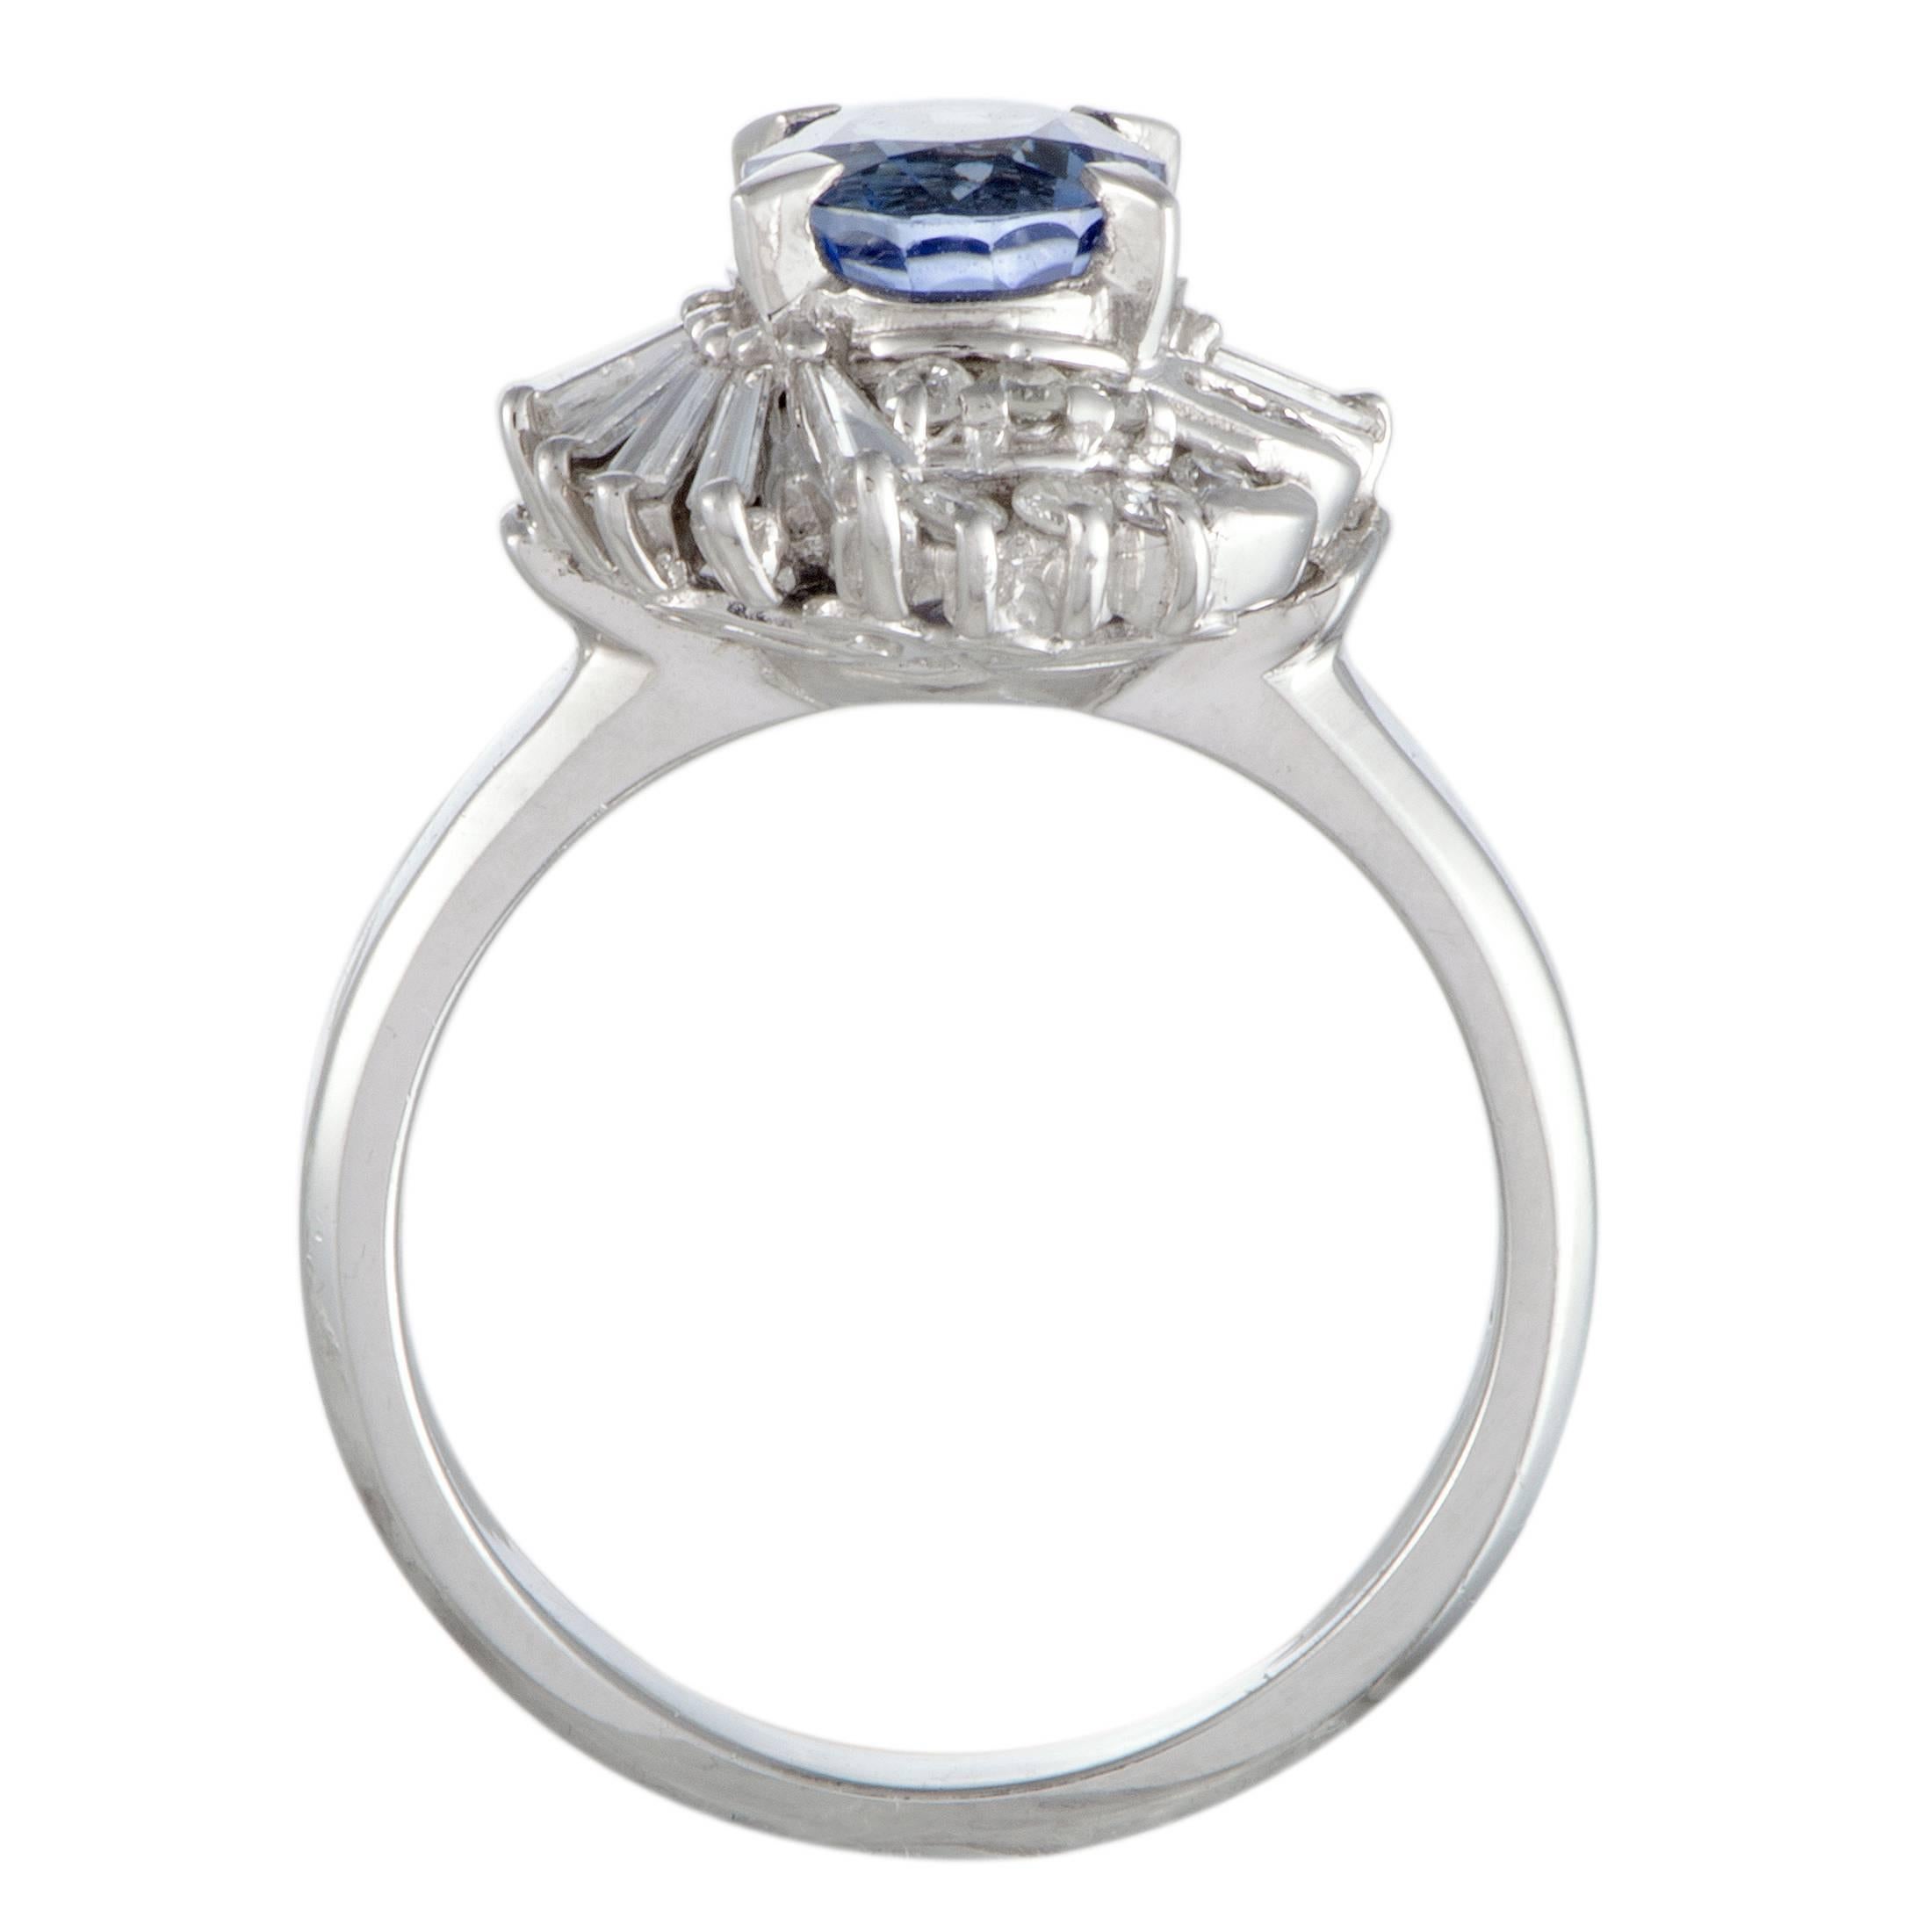 Accentuated by diversely cut diamond stones, the regal allure of sapphire is brought to a whole new level in this exceptional ring. Made of platinum, the ring boasts a total of 0.45 carats of diamonds, while the sapphire weighs 2.33 carats.
Ring Top